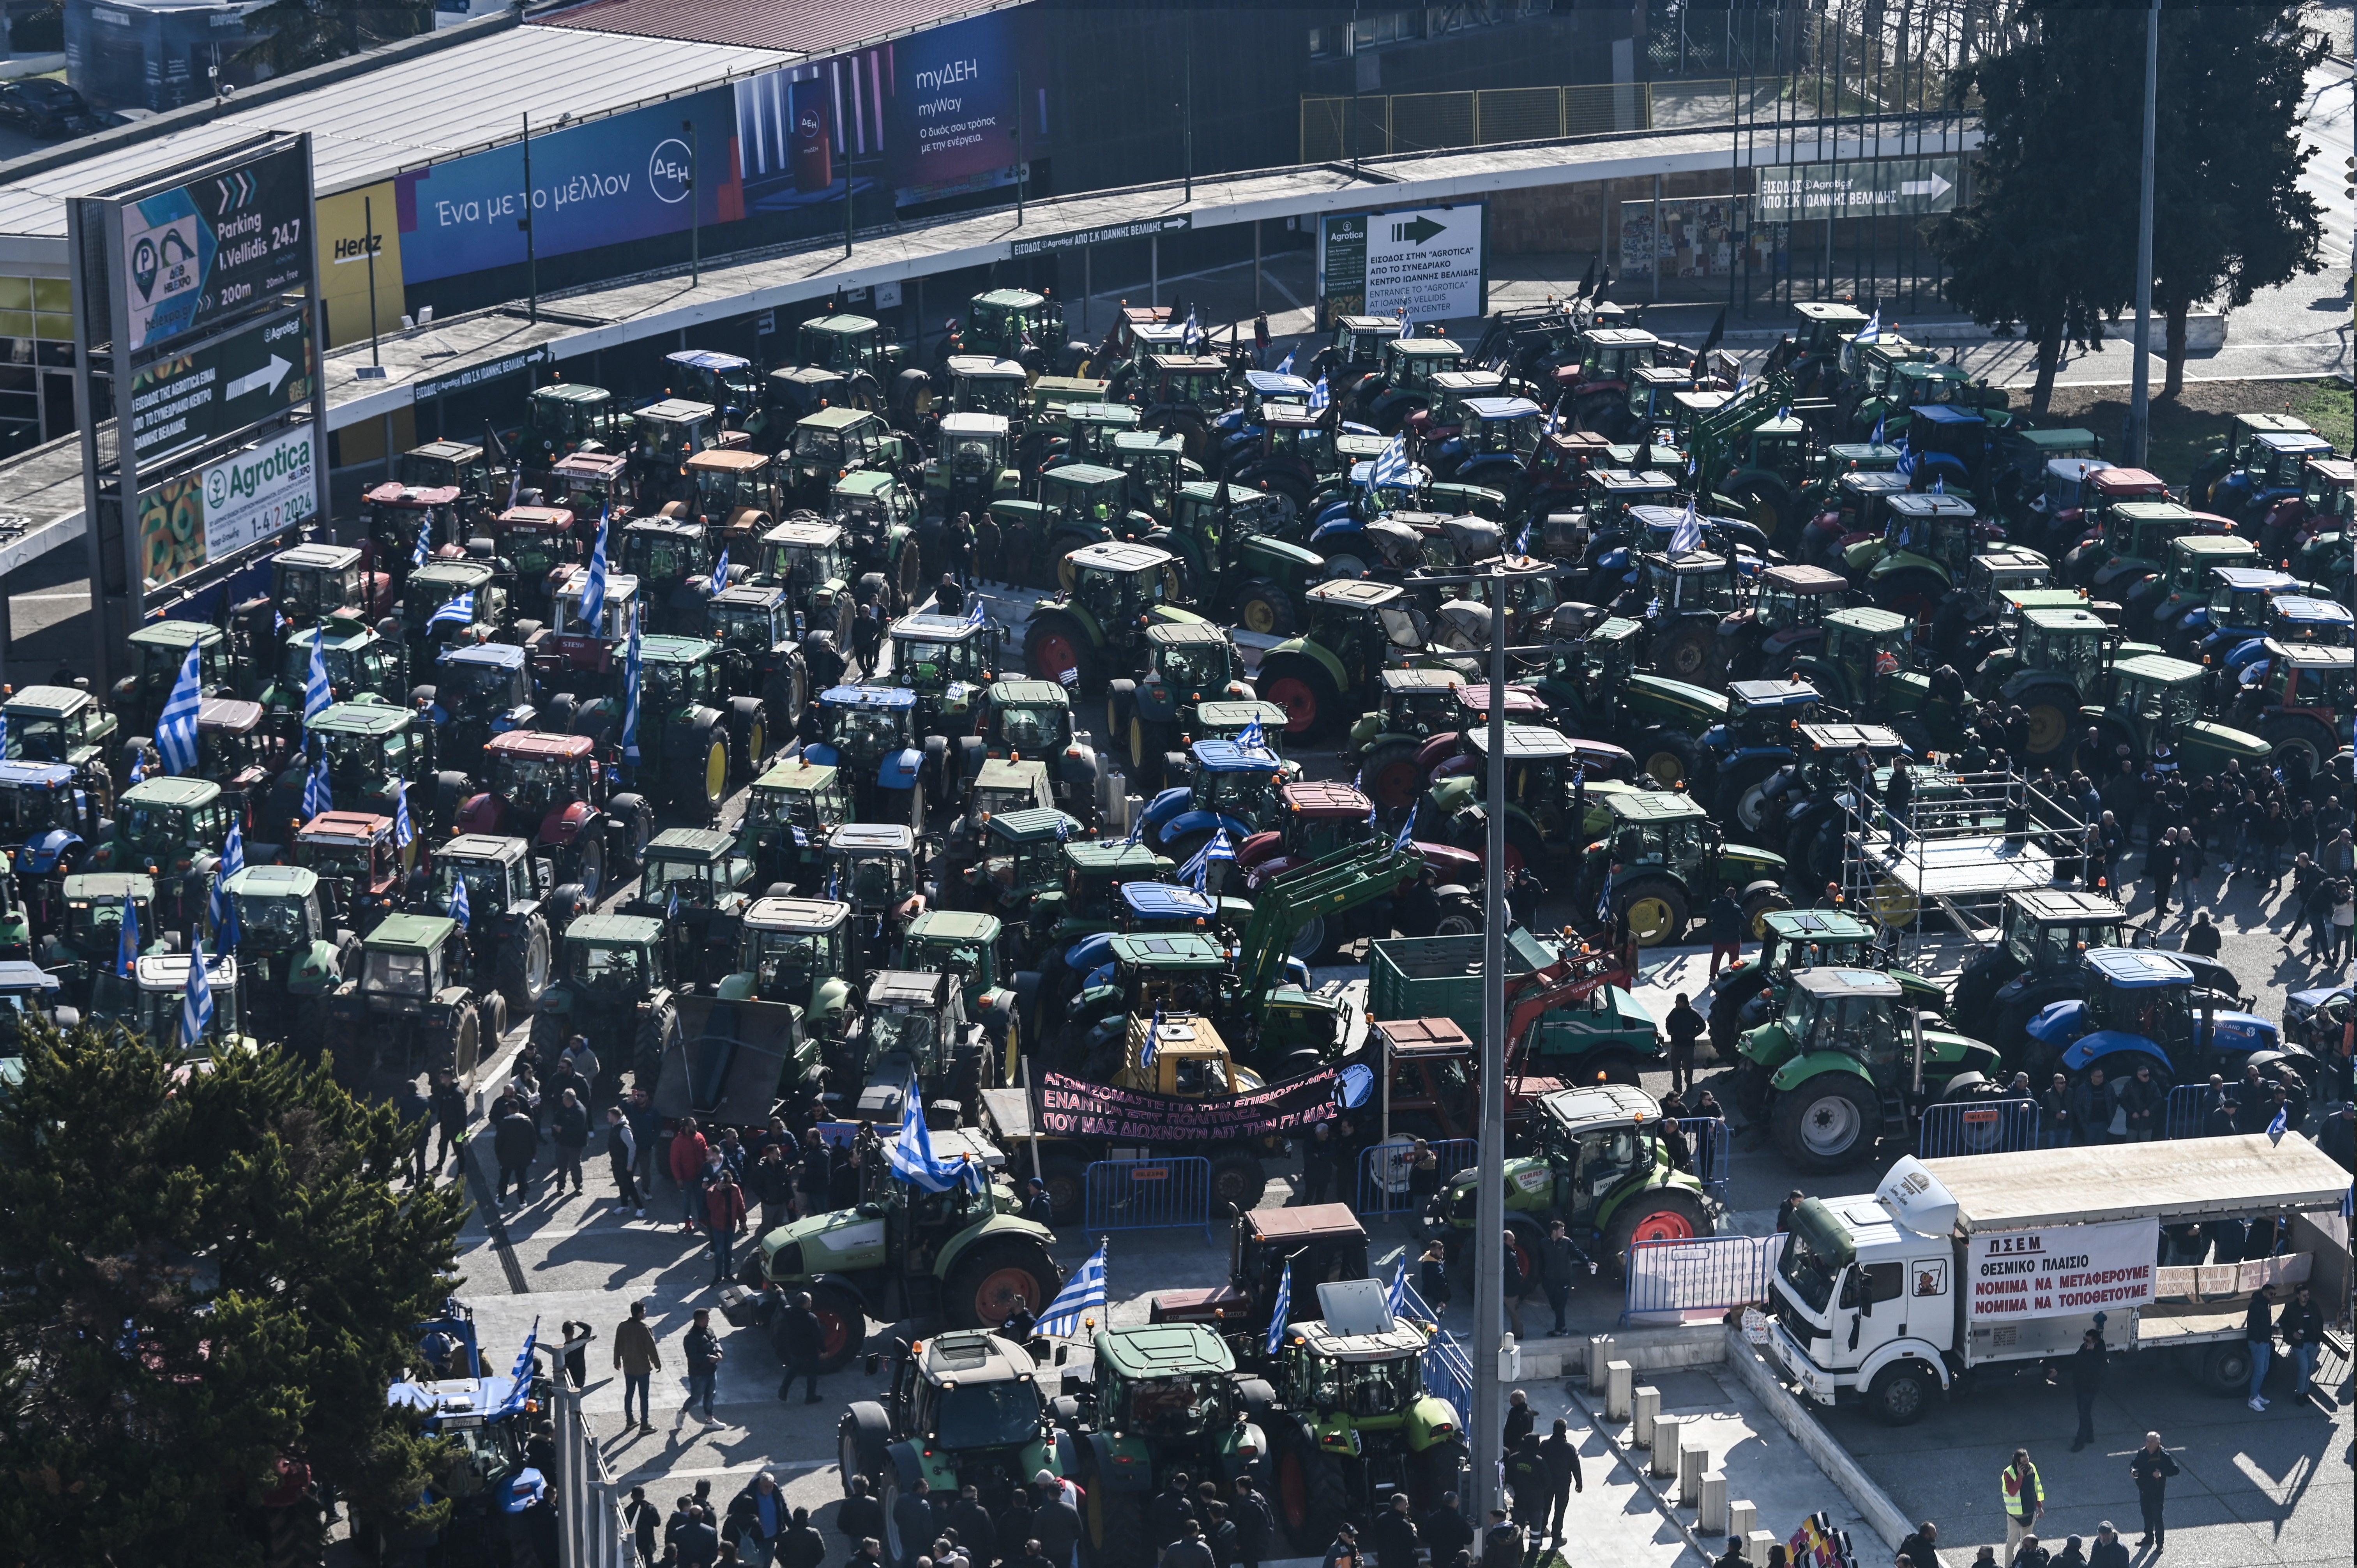 Farmers gather with their tractors at the Agrotica agricultural fair in Thessaloniki Greece